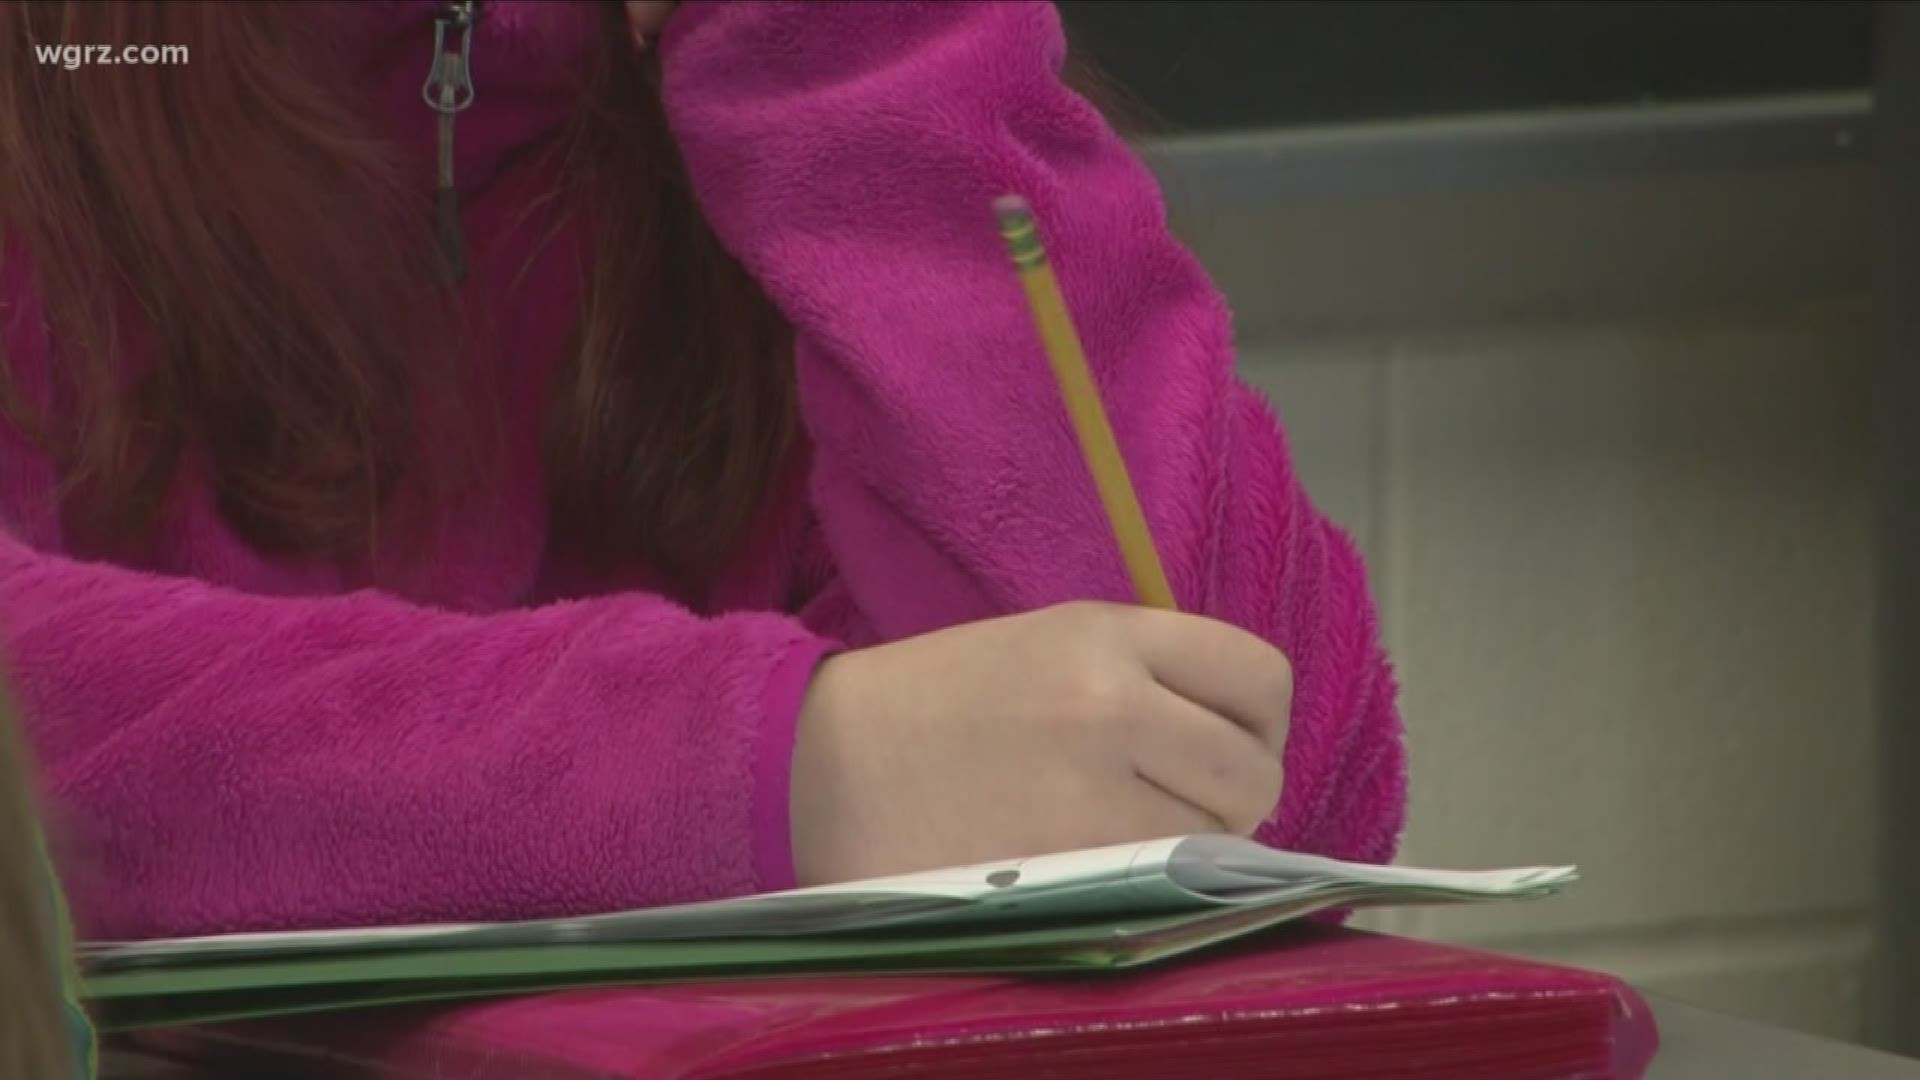 Western New York districts are seeing guidance from the New York State Education Department.